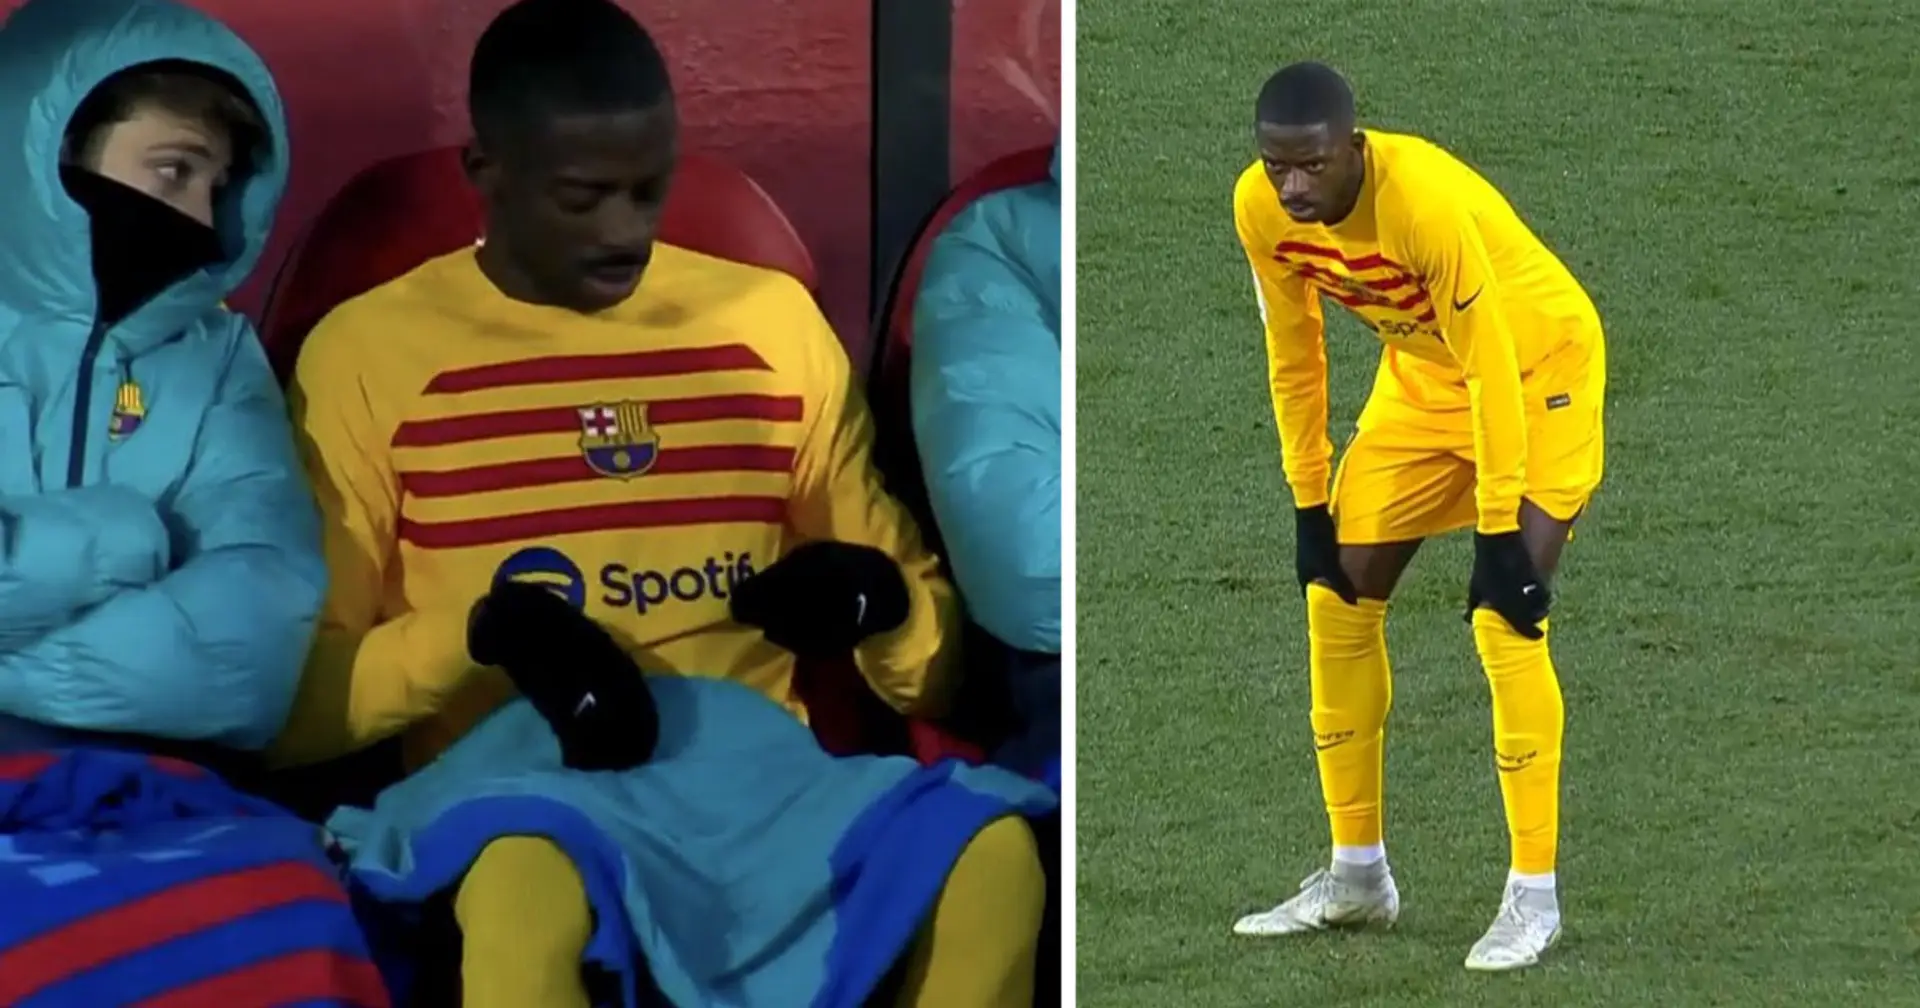 Top source explains why Dembele's injury 'doesn't seem very serious' as Ousmane limps off v Girona